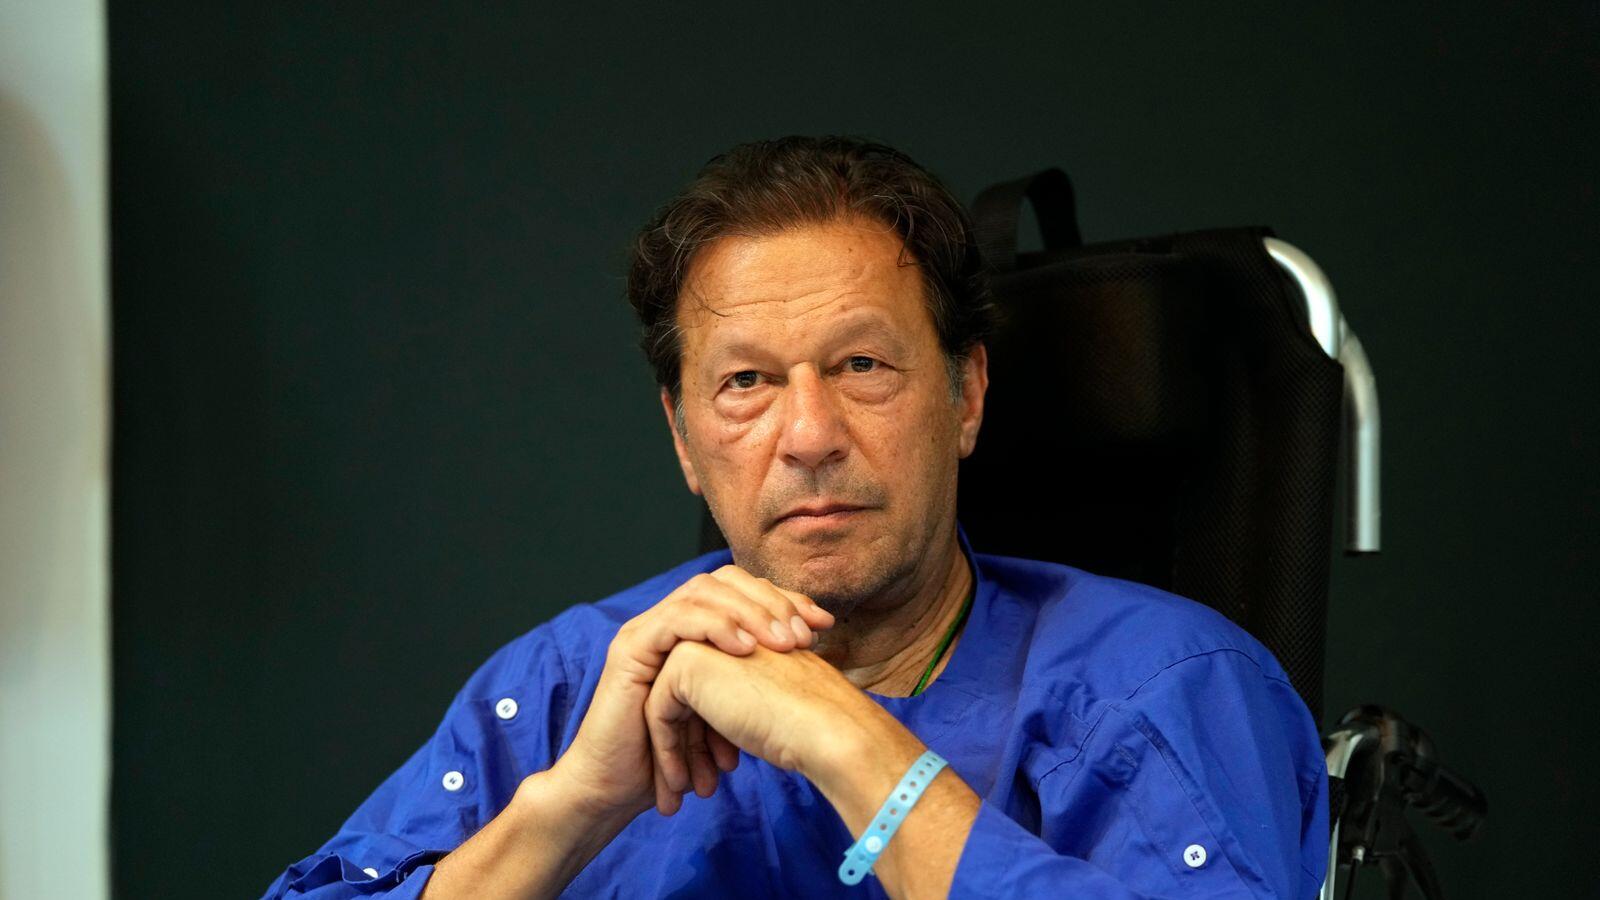 Pakistan: Imran Khan accuses Gen Bajwa of playing ‘double game’ against his govt - News